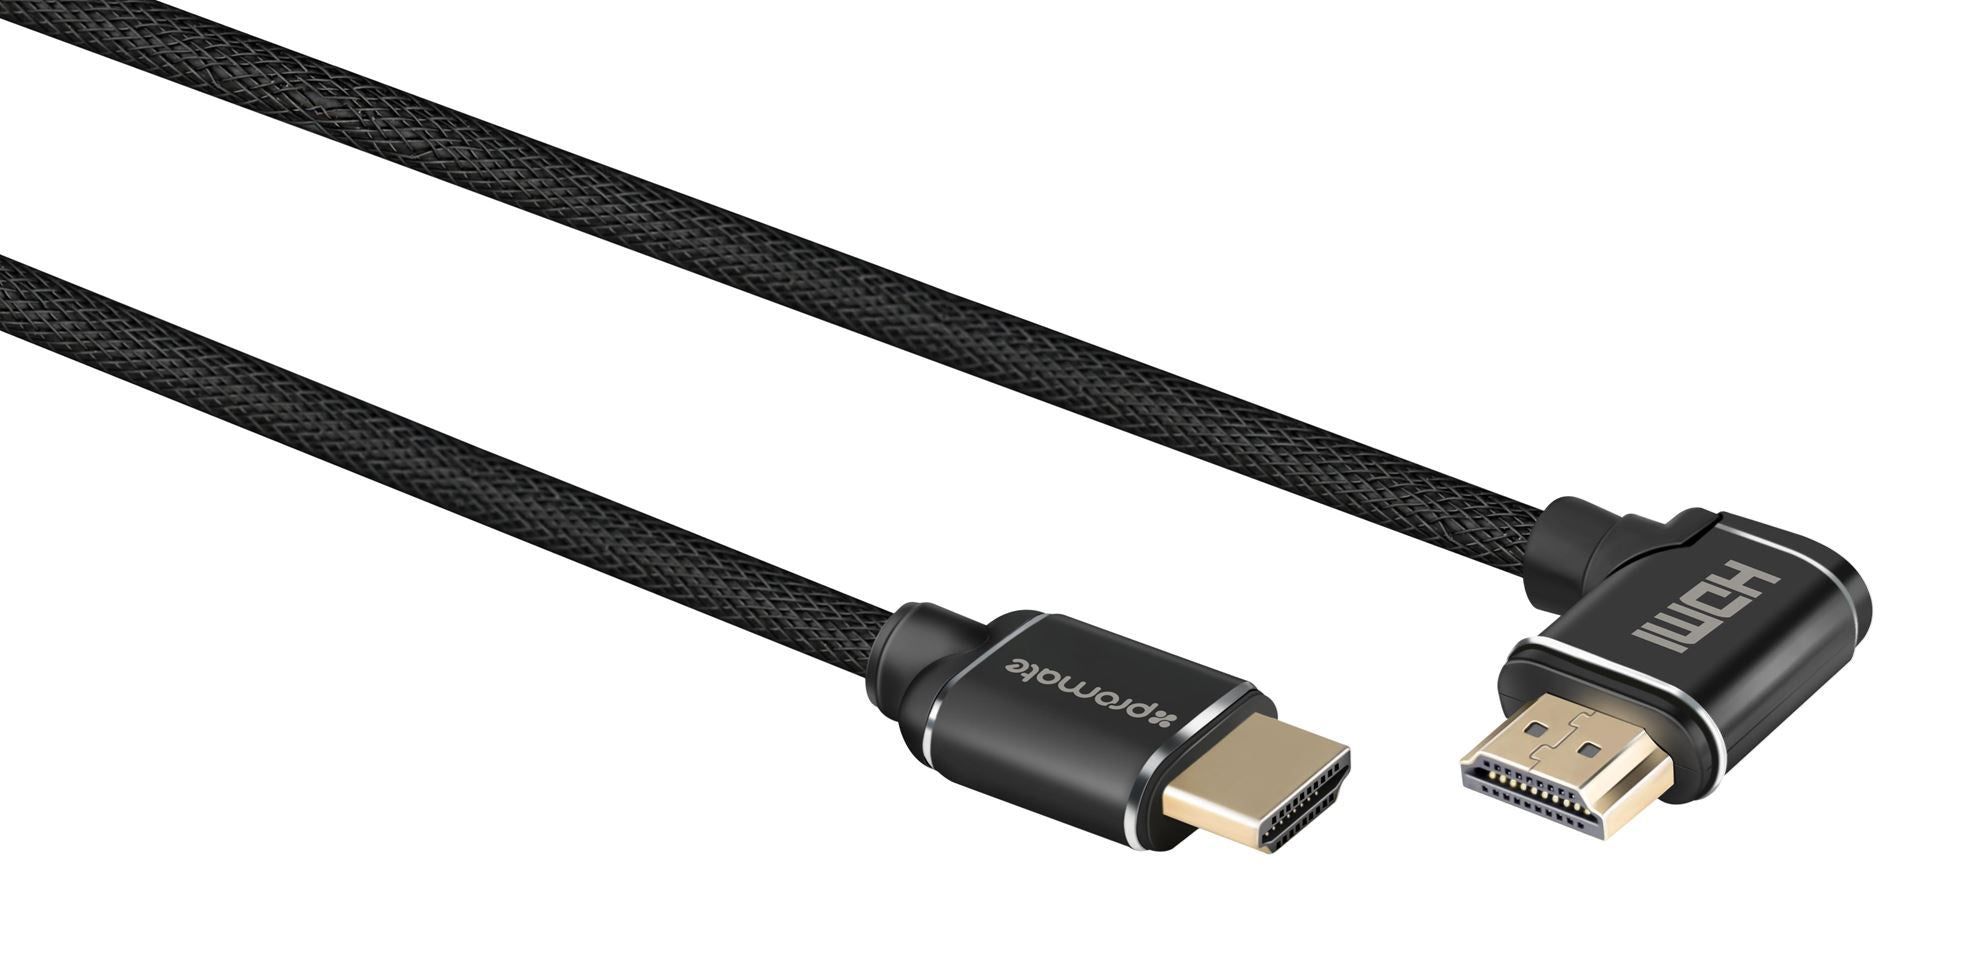 PROMATE_5m_4K_HDMI_right_angle_Cable._24K_Gold_plated._High-speed_Ethernet._3D_support._Mesh_braided_cable._Long_bend_lifespan._Max_Res:_4K@60Hz_(4096X2160)._Colour_black. 1684